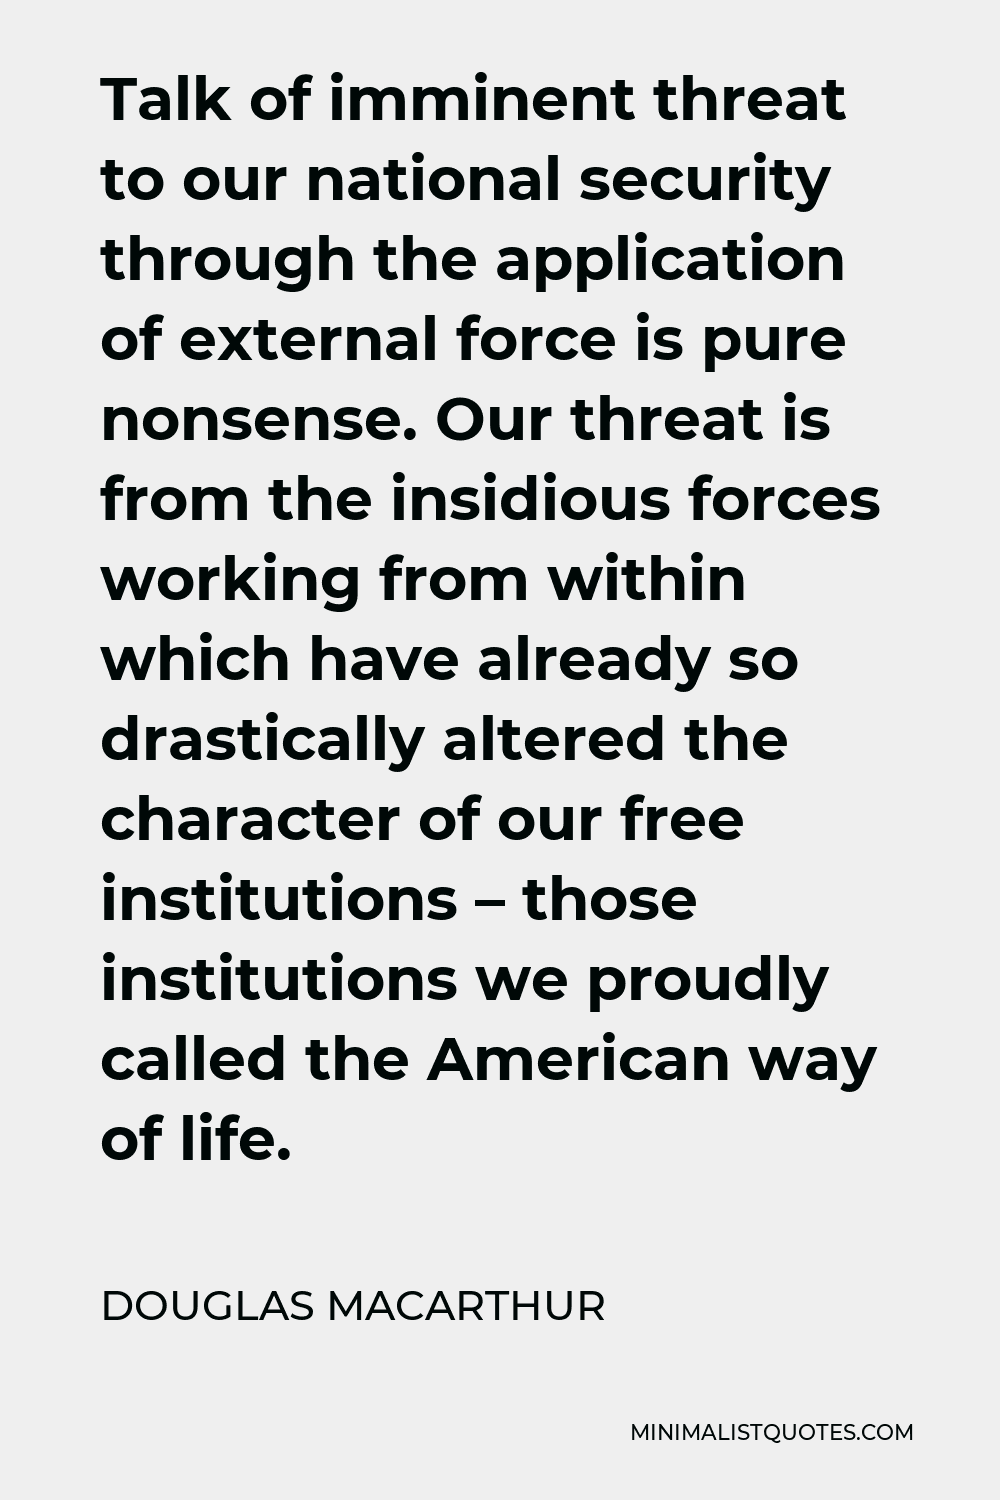 Douglas MacArthur Quote - Talk of imminent threat to our national security through the application of external force is pure nonsense. Our threat is from the insidious forces working from within which have already so drastically altered the character of our free institutions – those institutions we proudly called the American way of life.